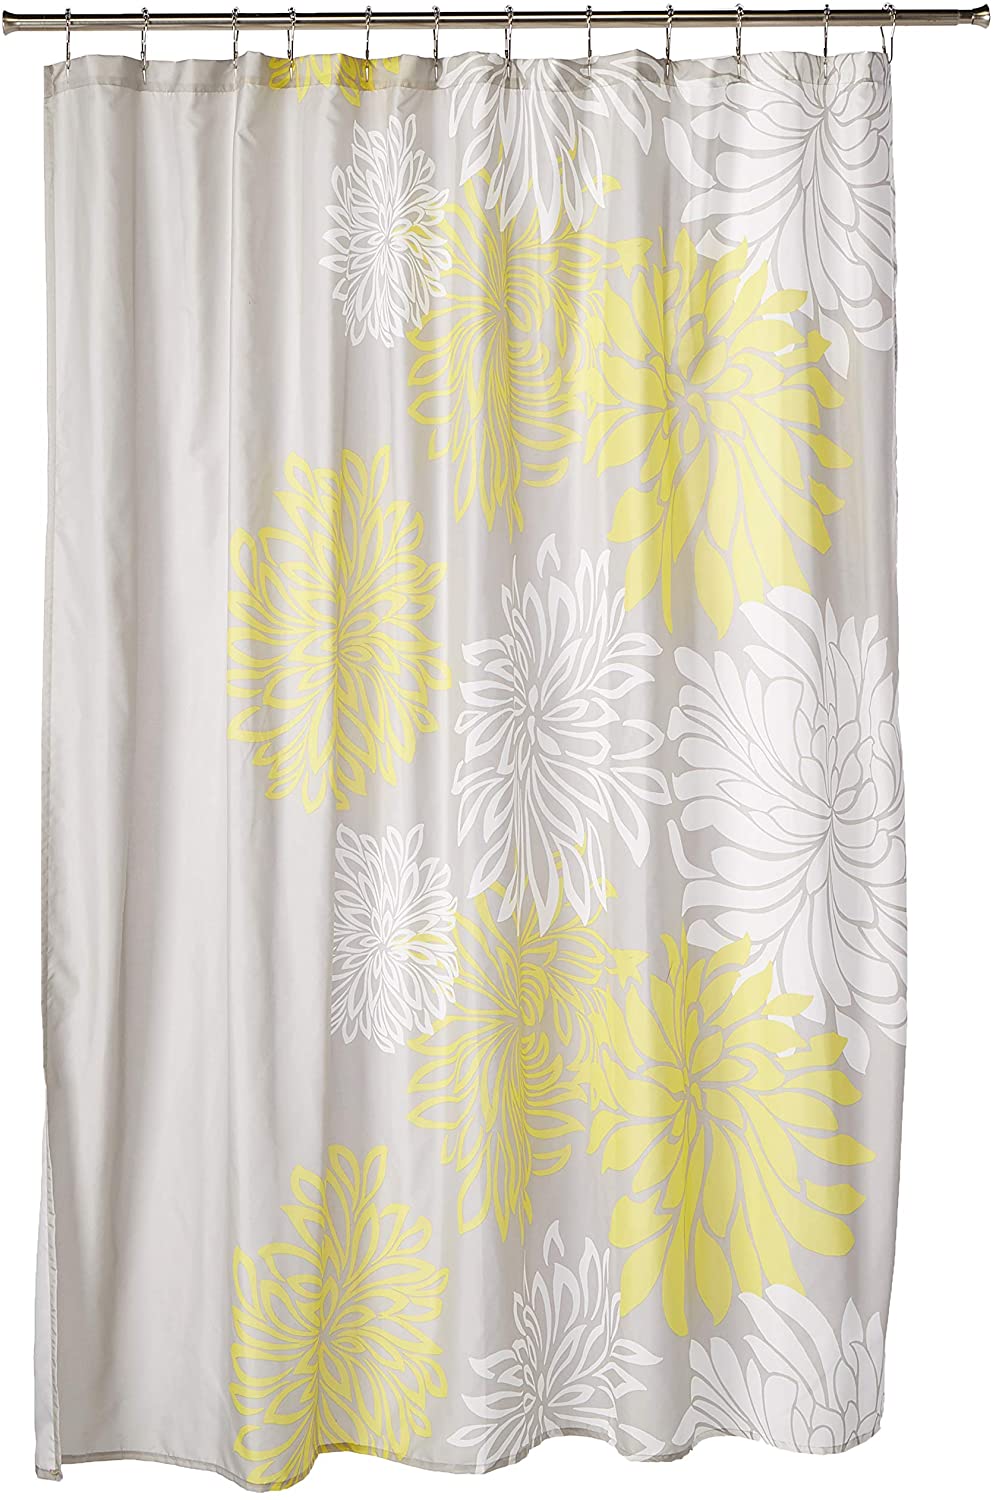 Details about   Comfort Spaces Enya Bathroom Shower Floral Printed Cute Chic Microfiber Fabric B 